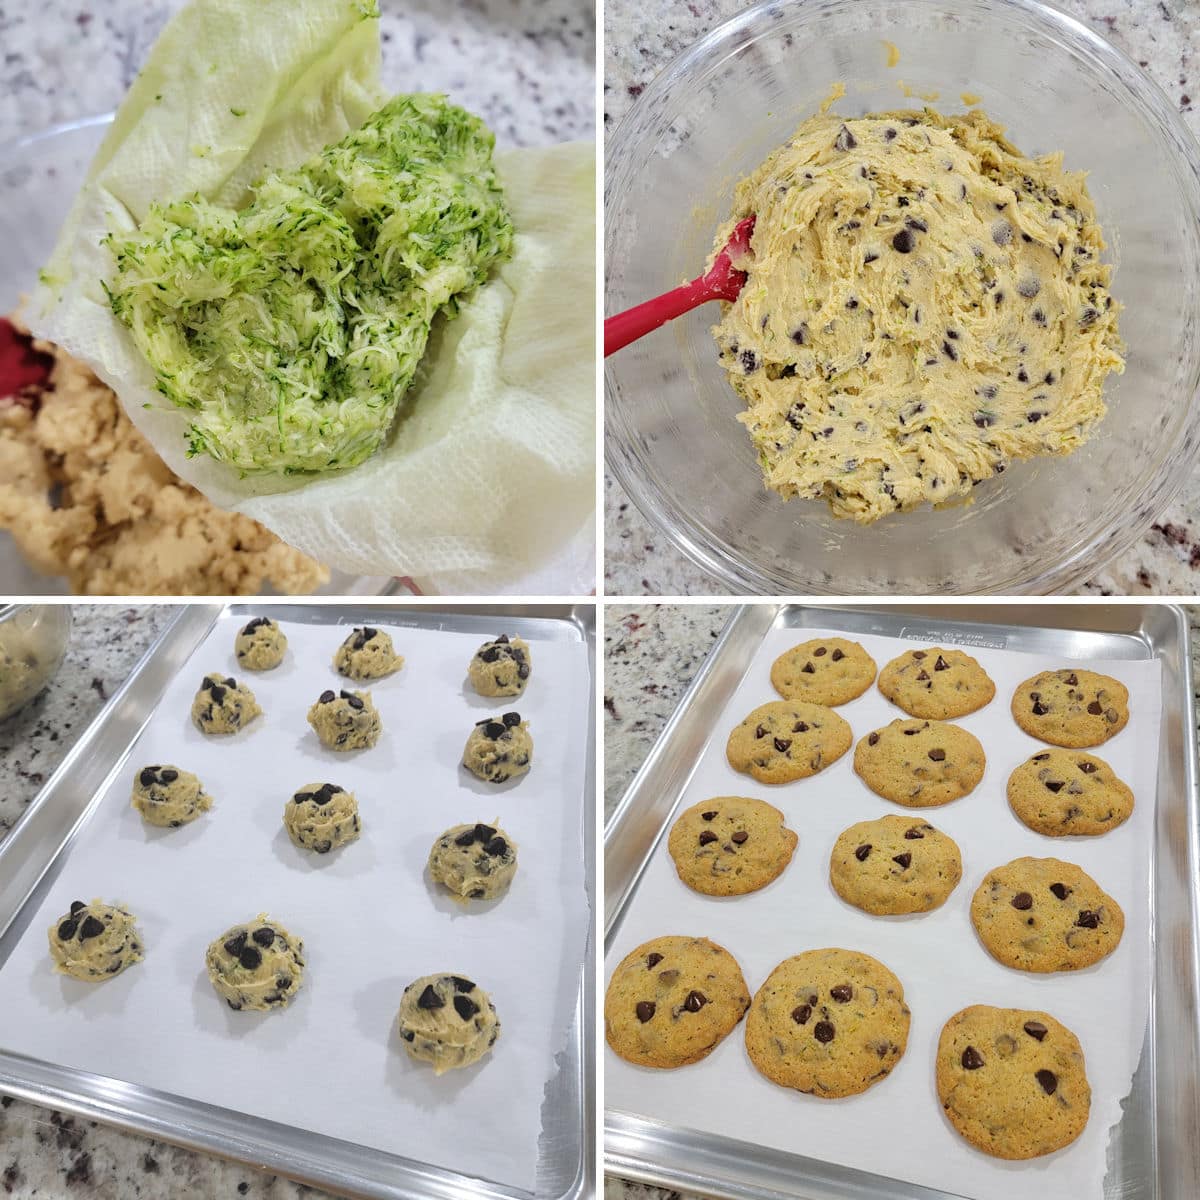 Mixing zucchini chocolate chip cookie dough and baking on a sheet pan.